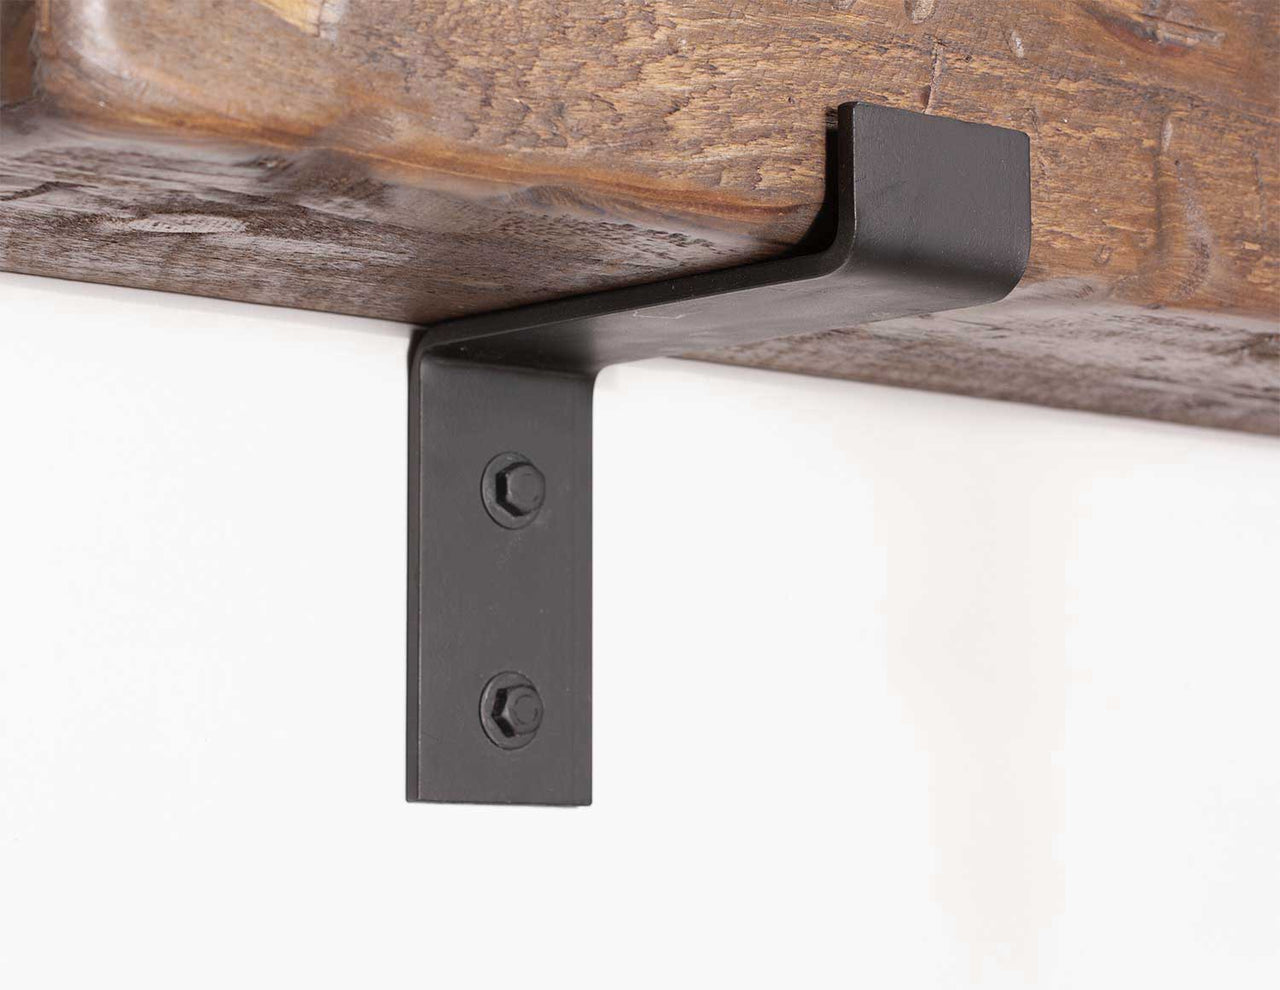 Rustic Mantel with Metal Brackets